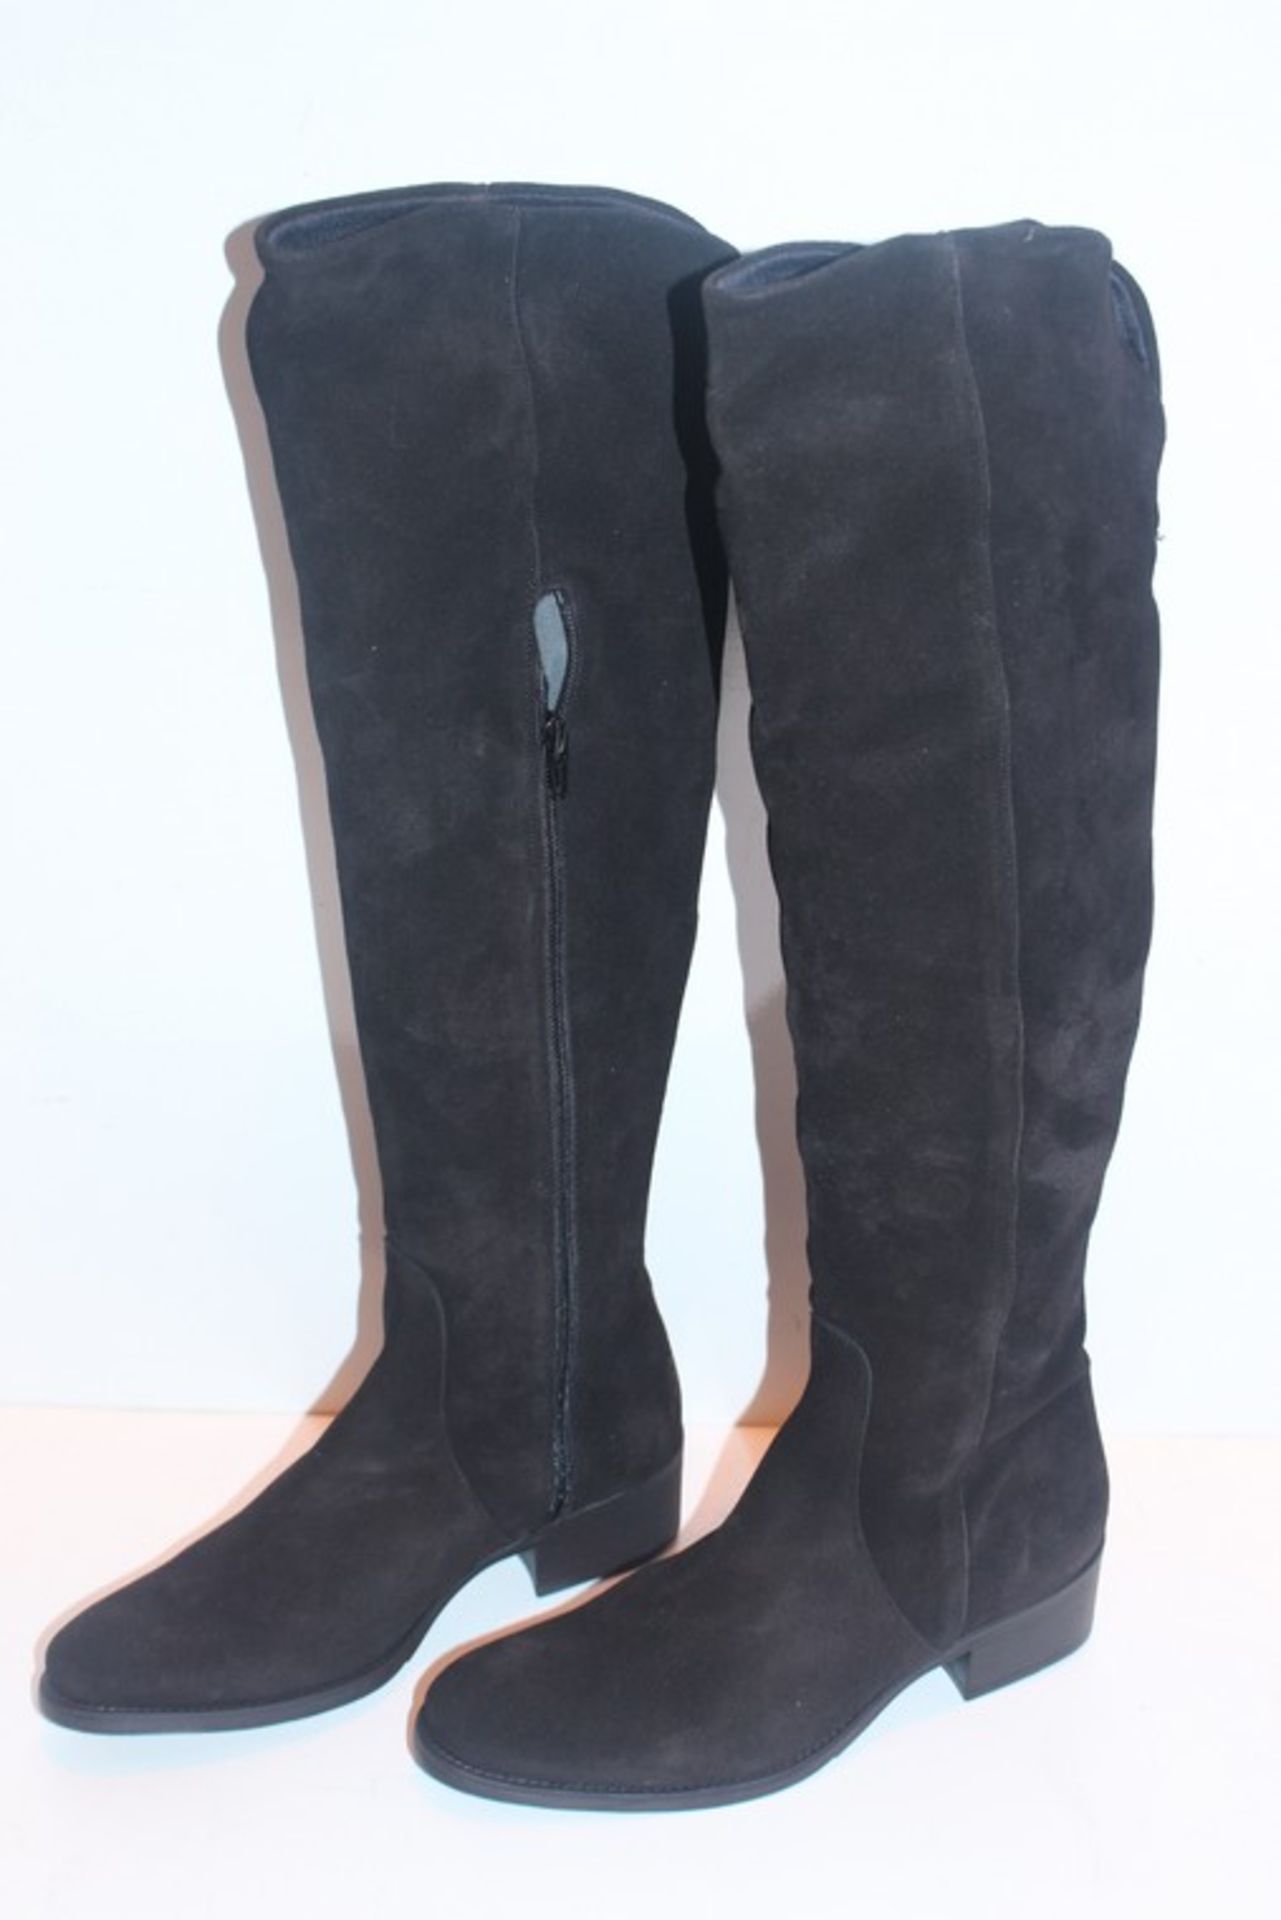 1 x BOXED PAIR OF TALLIN SIZE 5 WOMENS KNEE HIGH BOOTS IN BLACK RRP £150 (01.11.17) (3962181) *